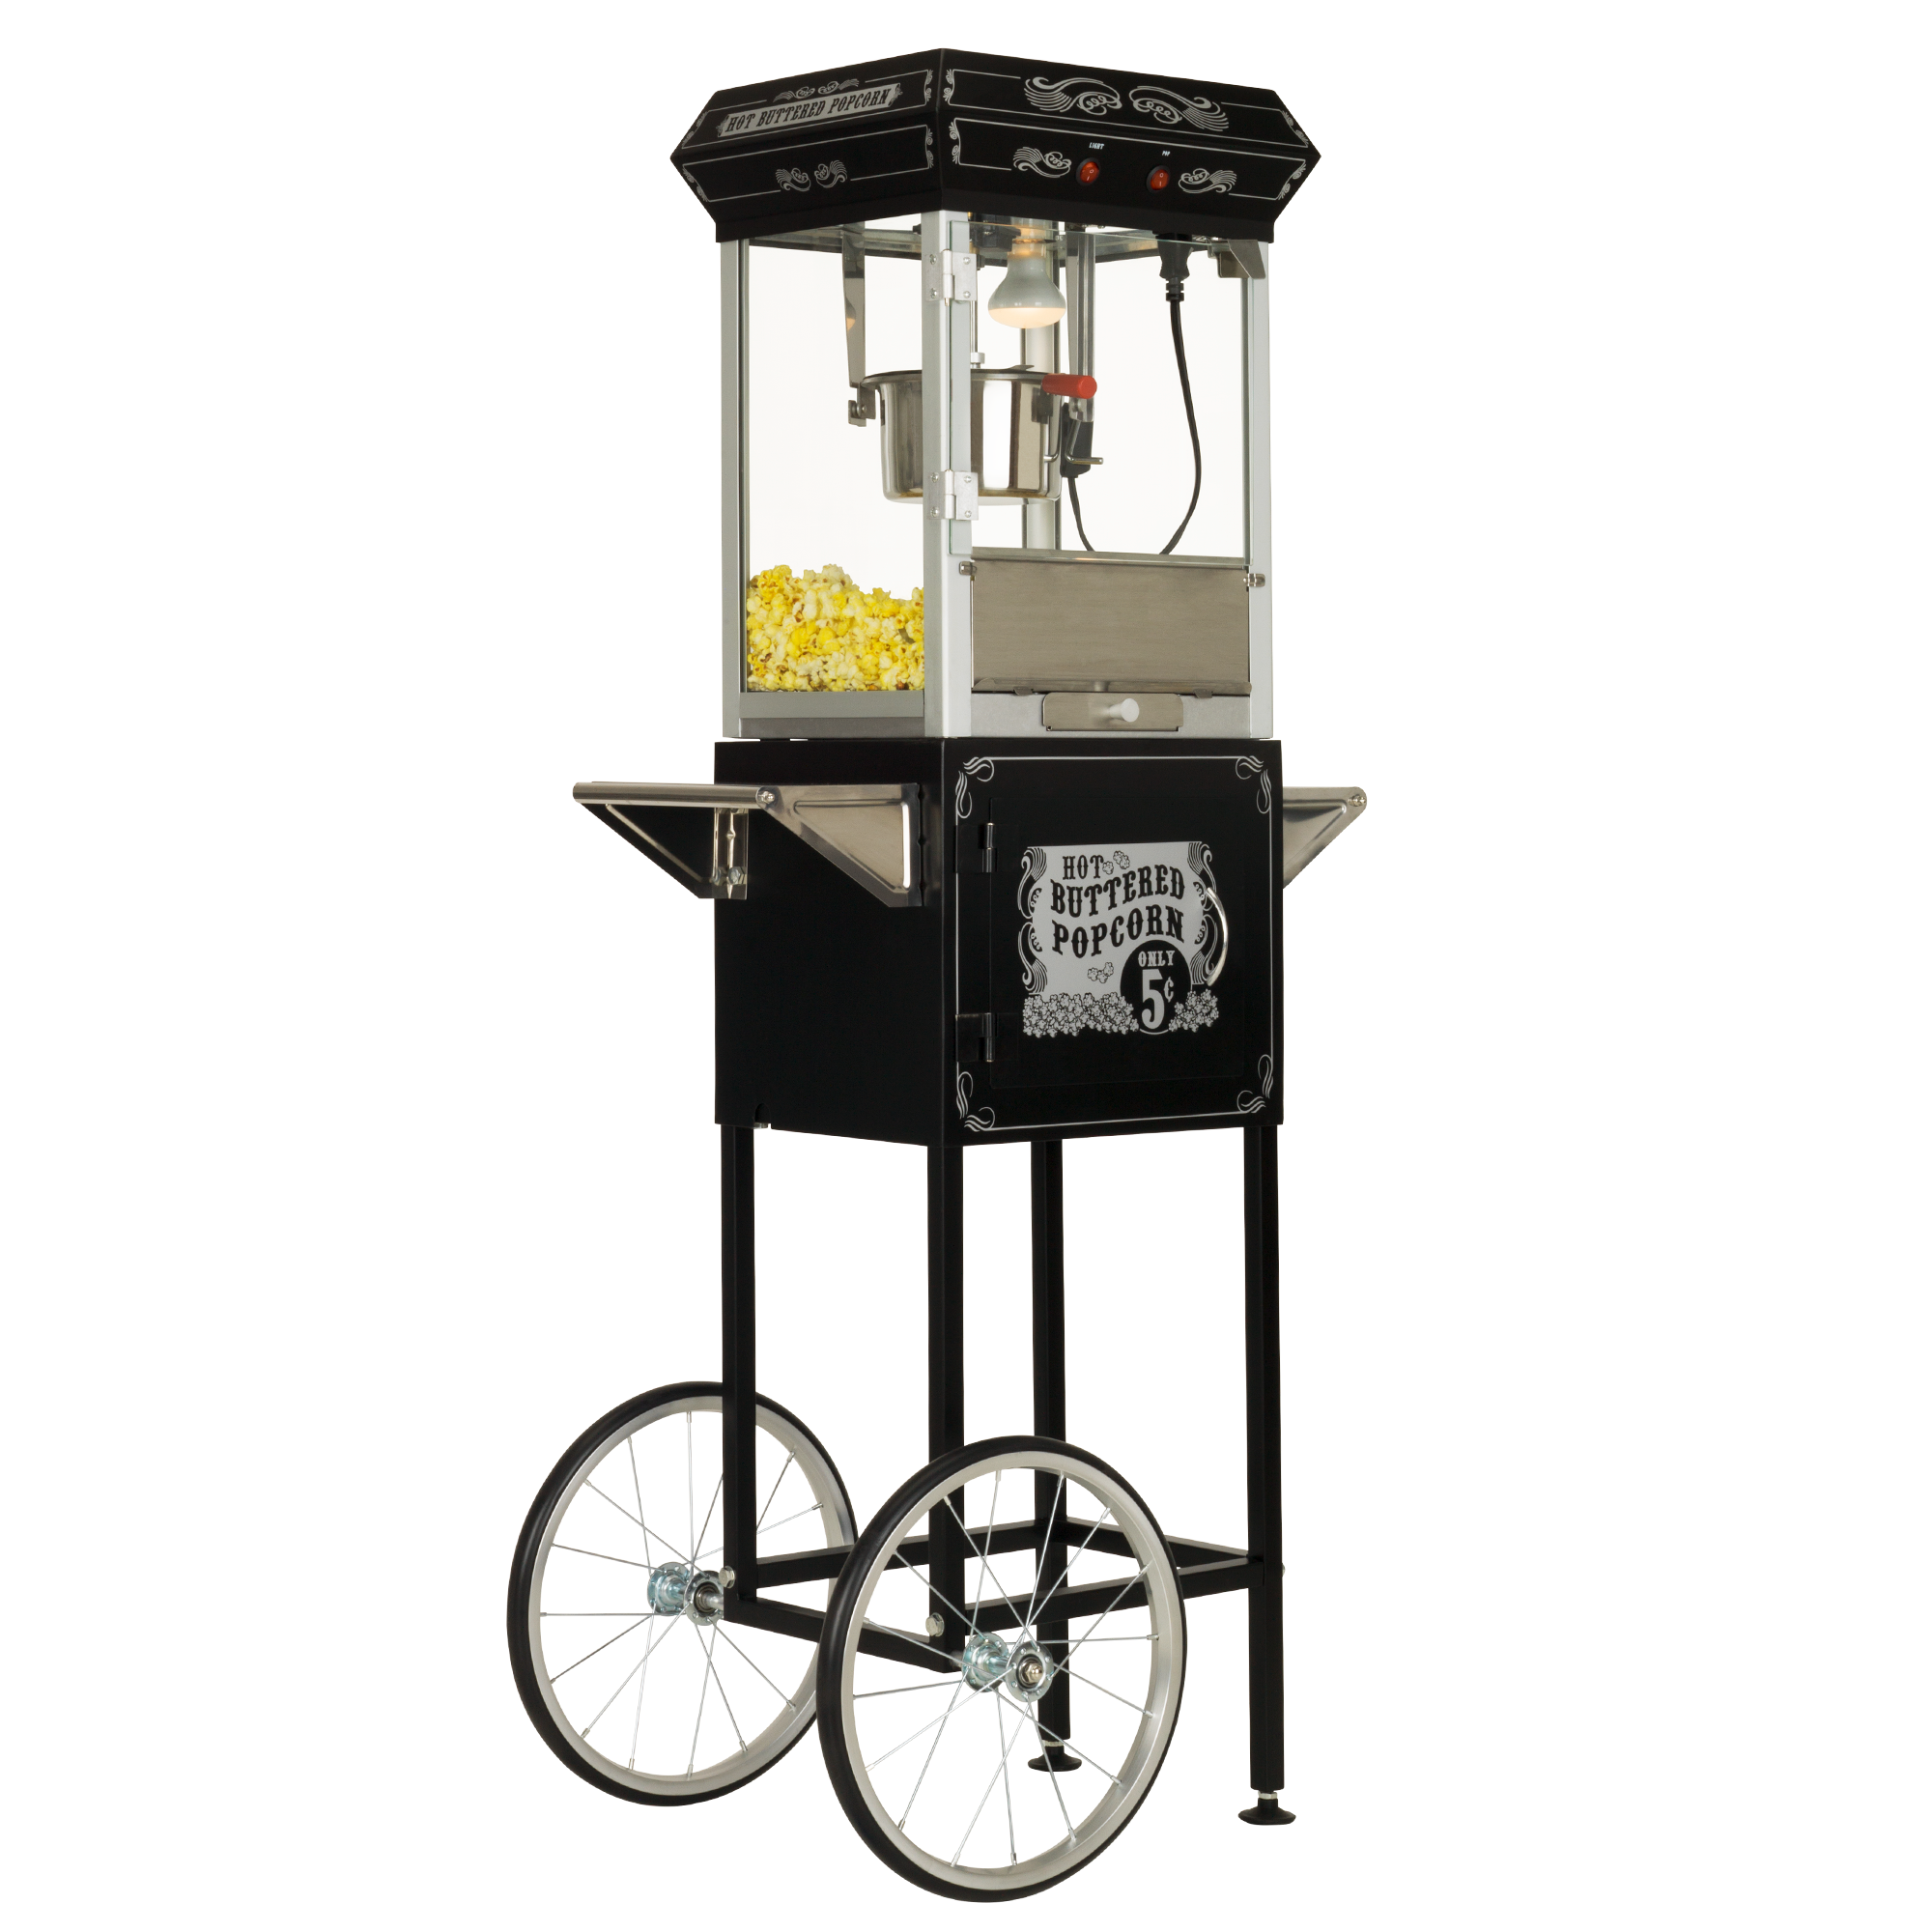 Funtime Sideshow Popper 4-oz Hot Oil Popcorn Machine with Black/ Silver Cart